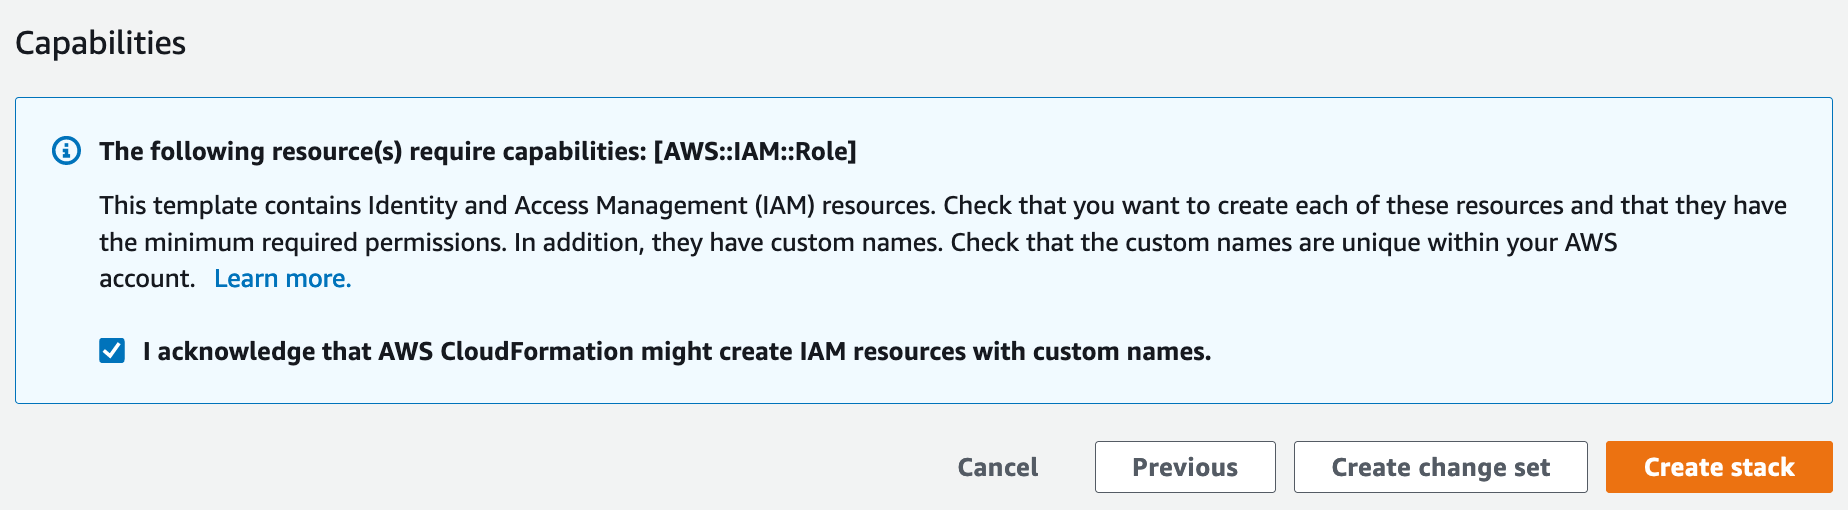 _images/RiskManager_IAM_Acknowledgement.png